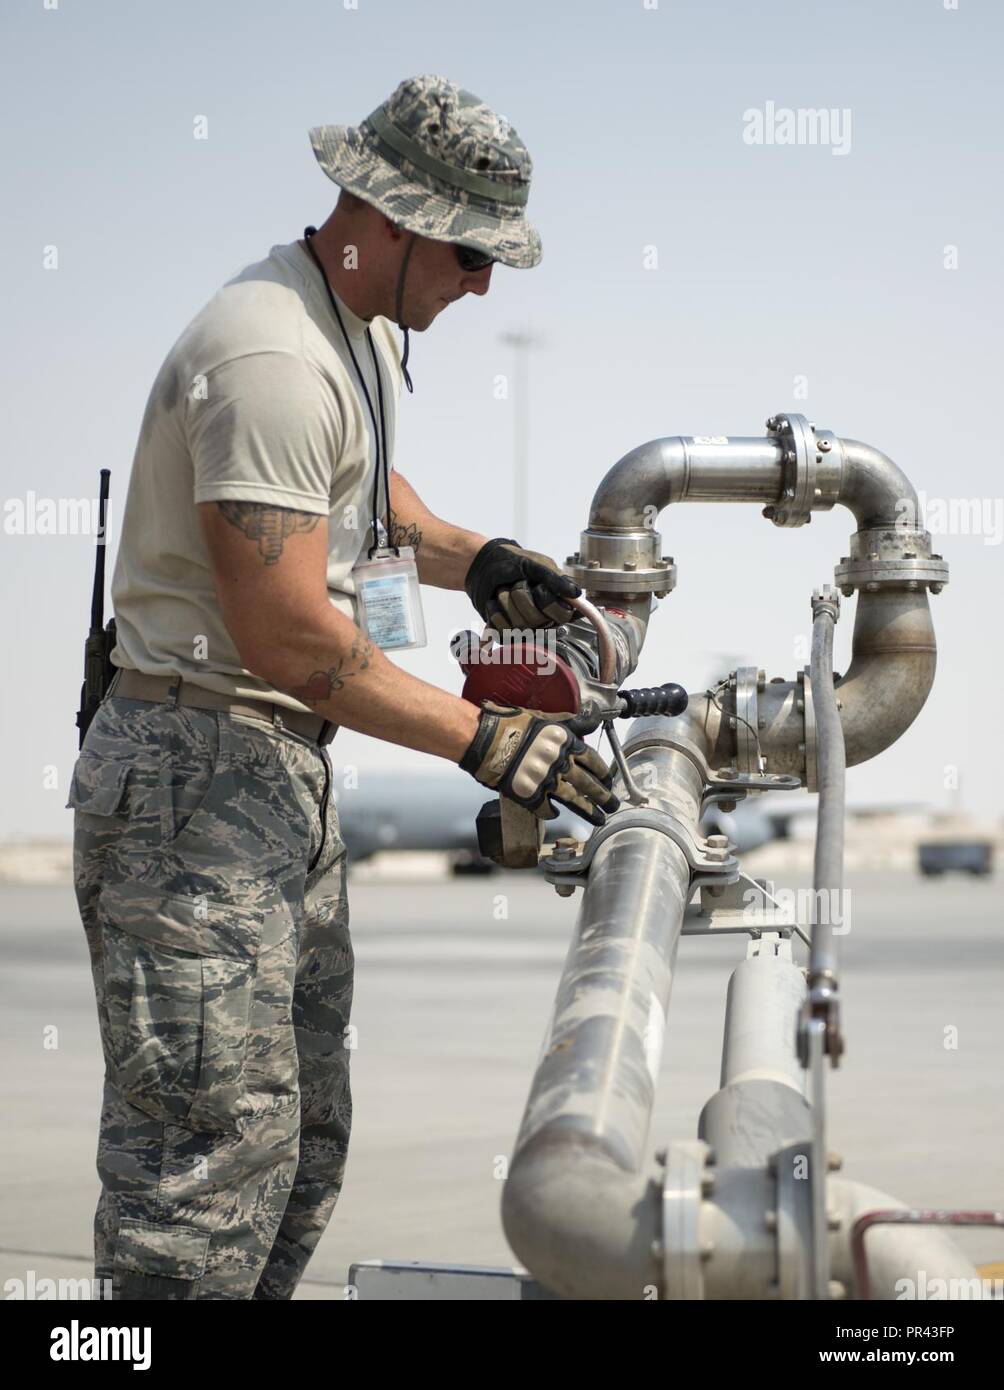 U.S Air Force Tech. Sgt. Matthew Kaski, dayshift supervisor with the 379th  Expeditionary Logistics Readiness Squadron, Fuels Management Flight,  completes refueling his truck at Al Udeid Air Base, Qatar, July 24, 2017.